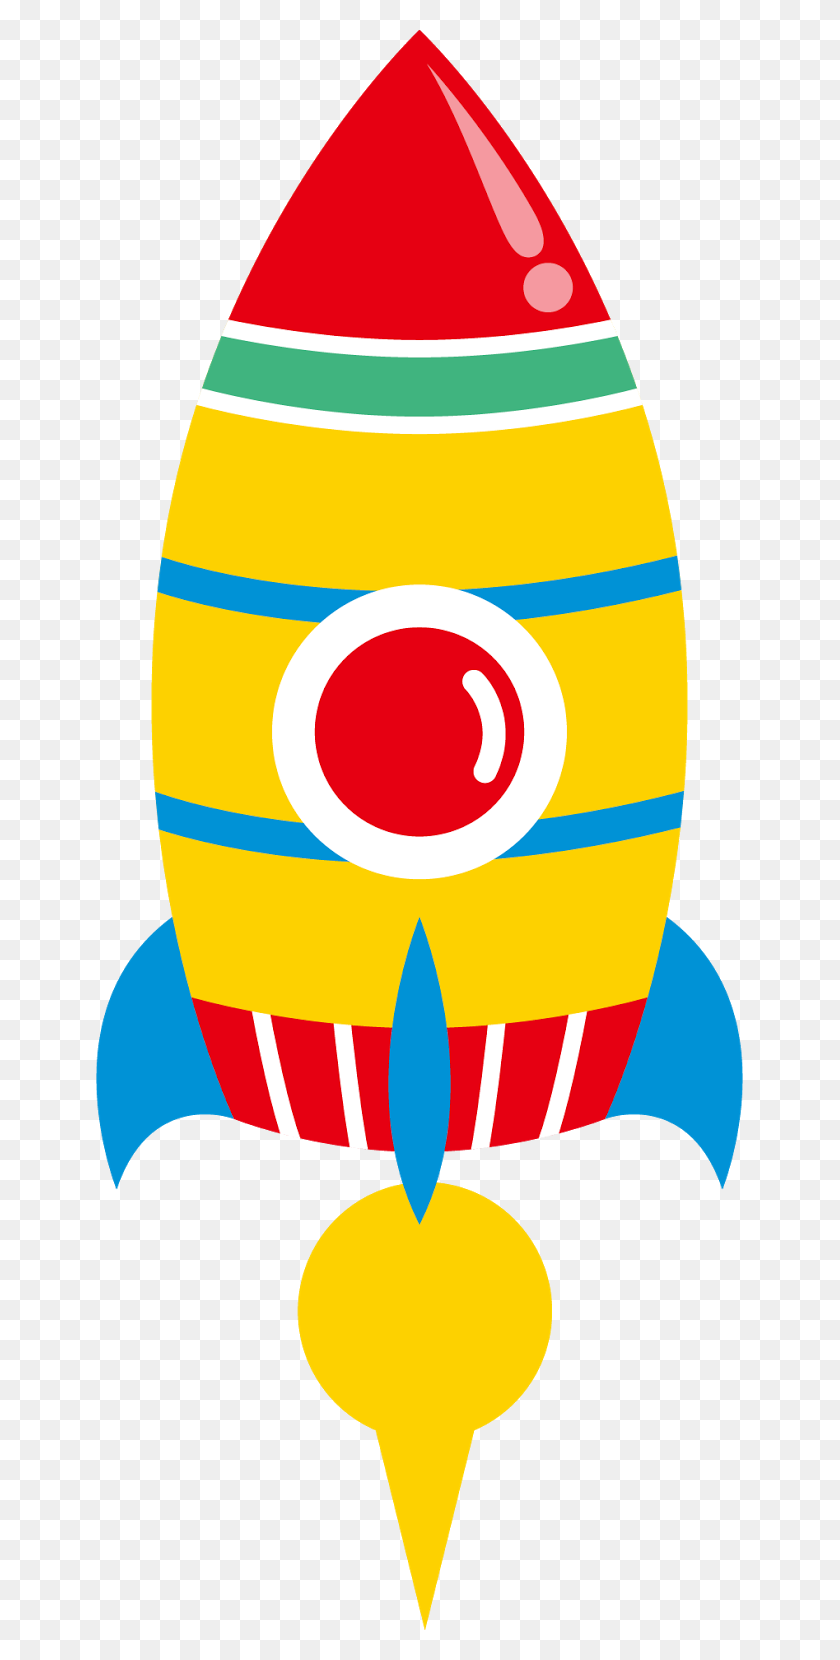 647x1600 Aliens Astronauts And Spaceships How Fun With Spaceship Clipart - Nasa Clipart